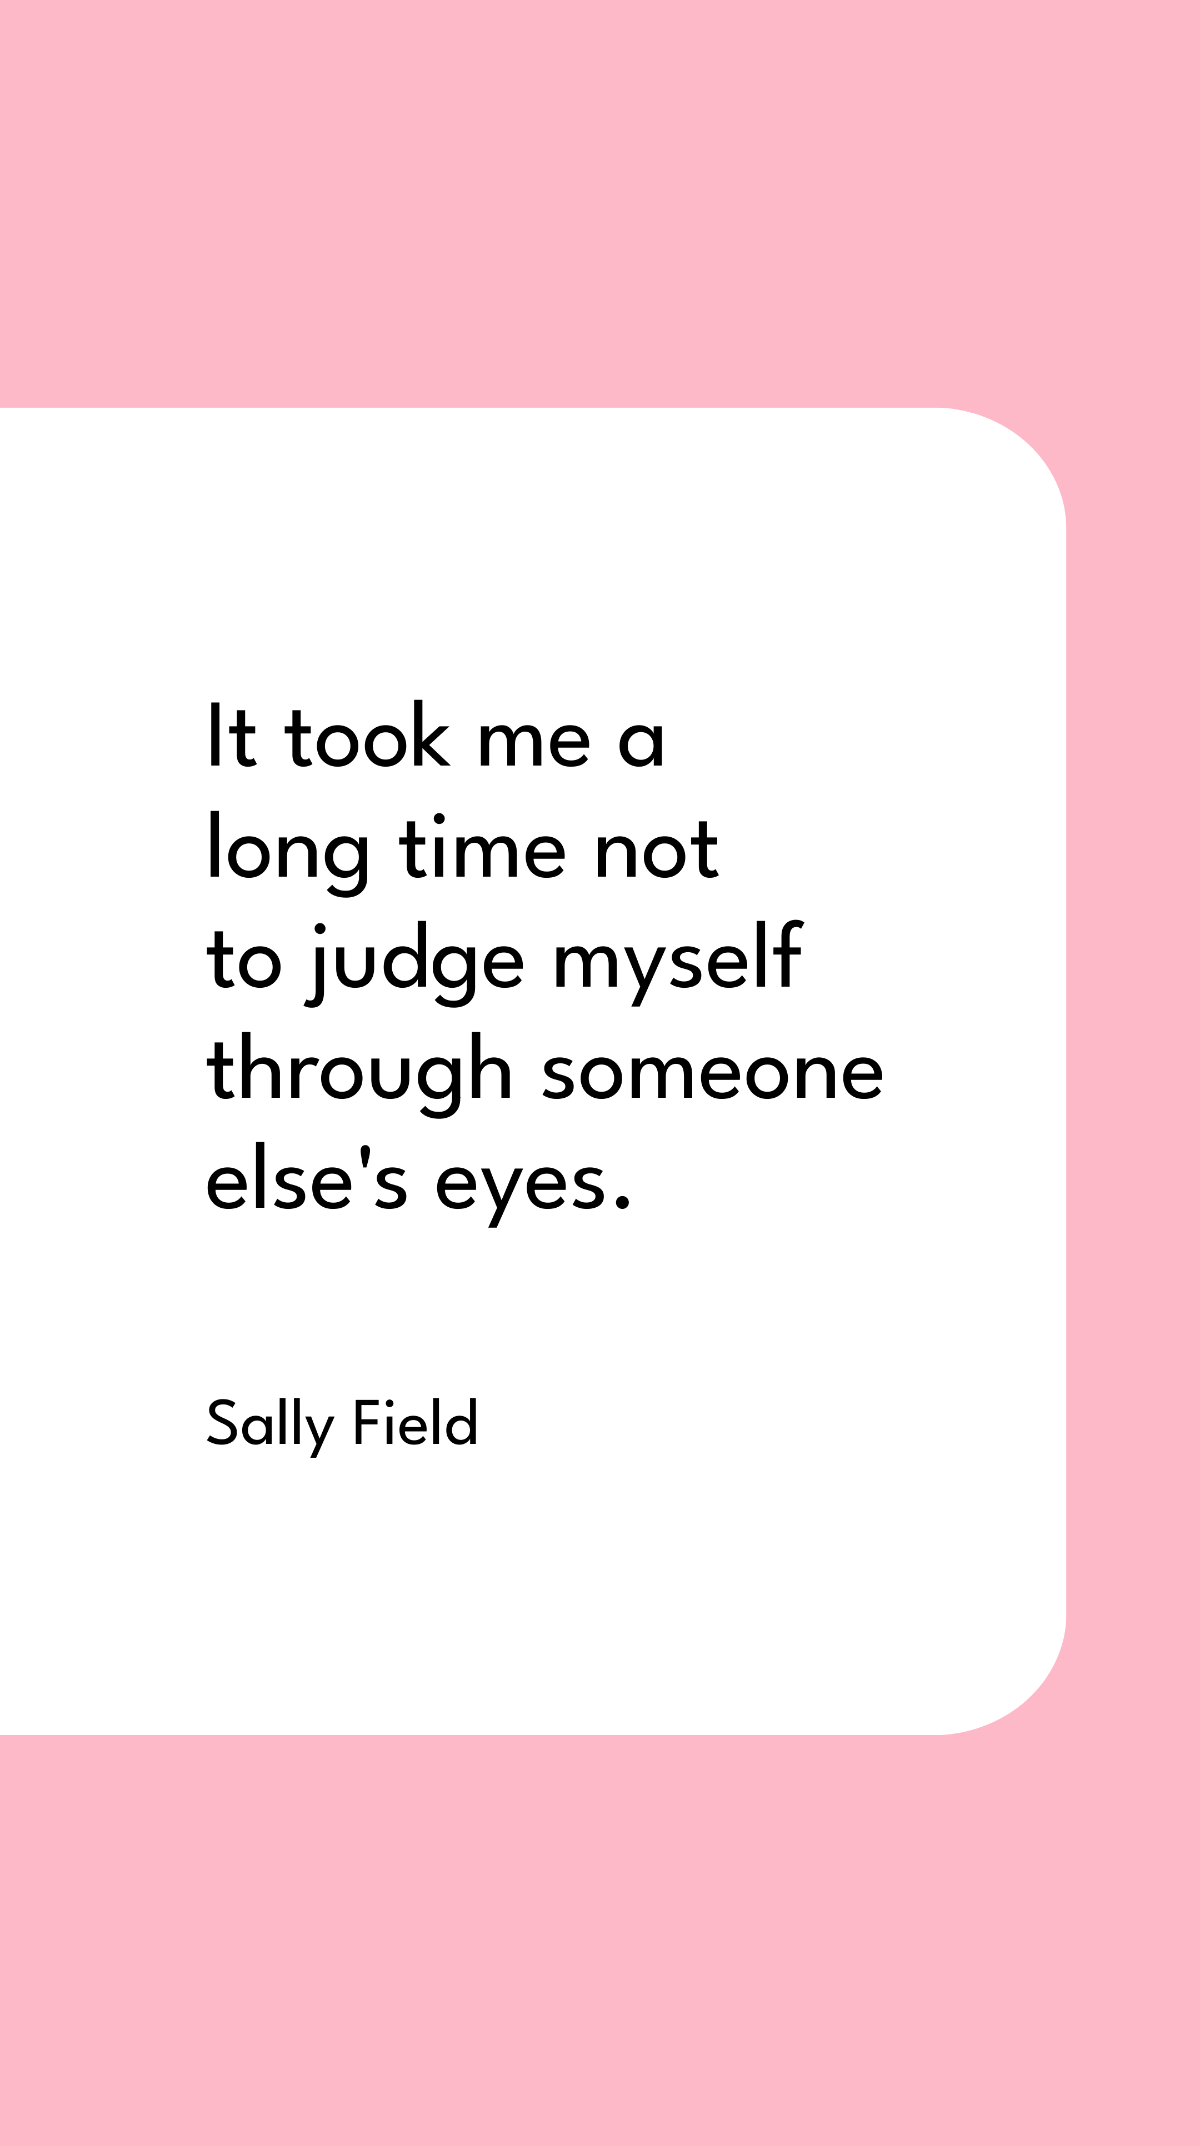 Sally Field - It took me a long time not to judge myself through someone else's eyes.